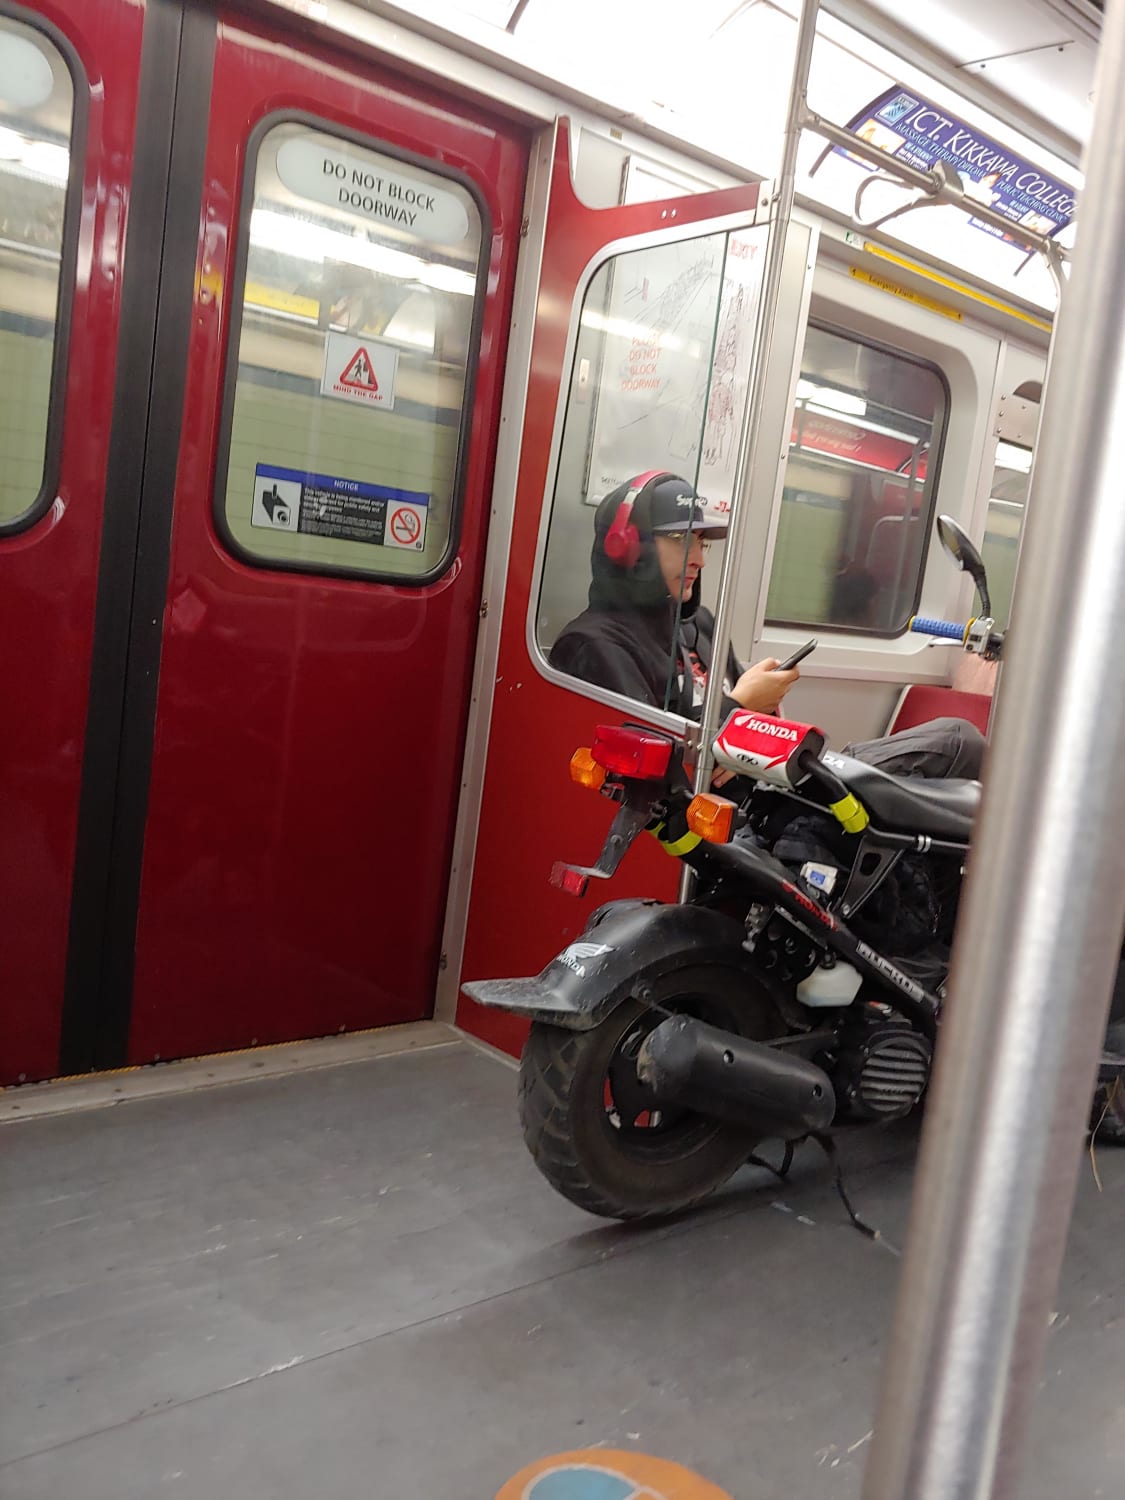 Dude showing off his moped on the TTC